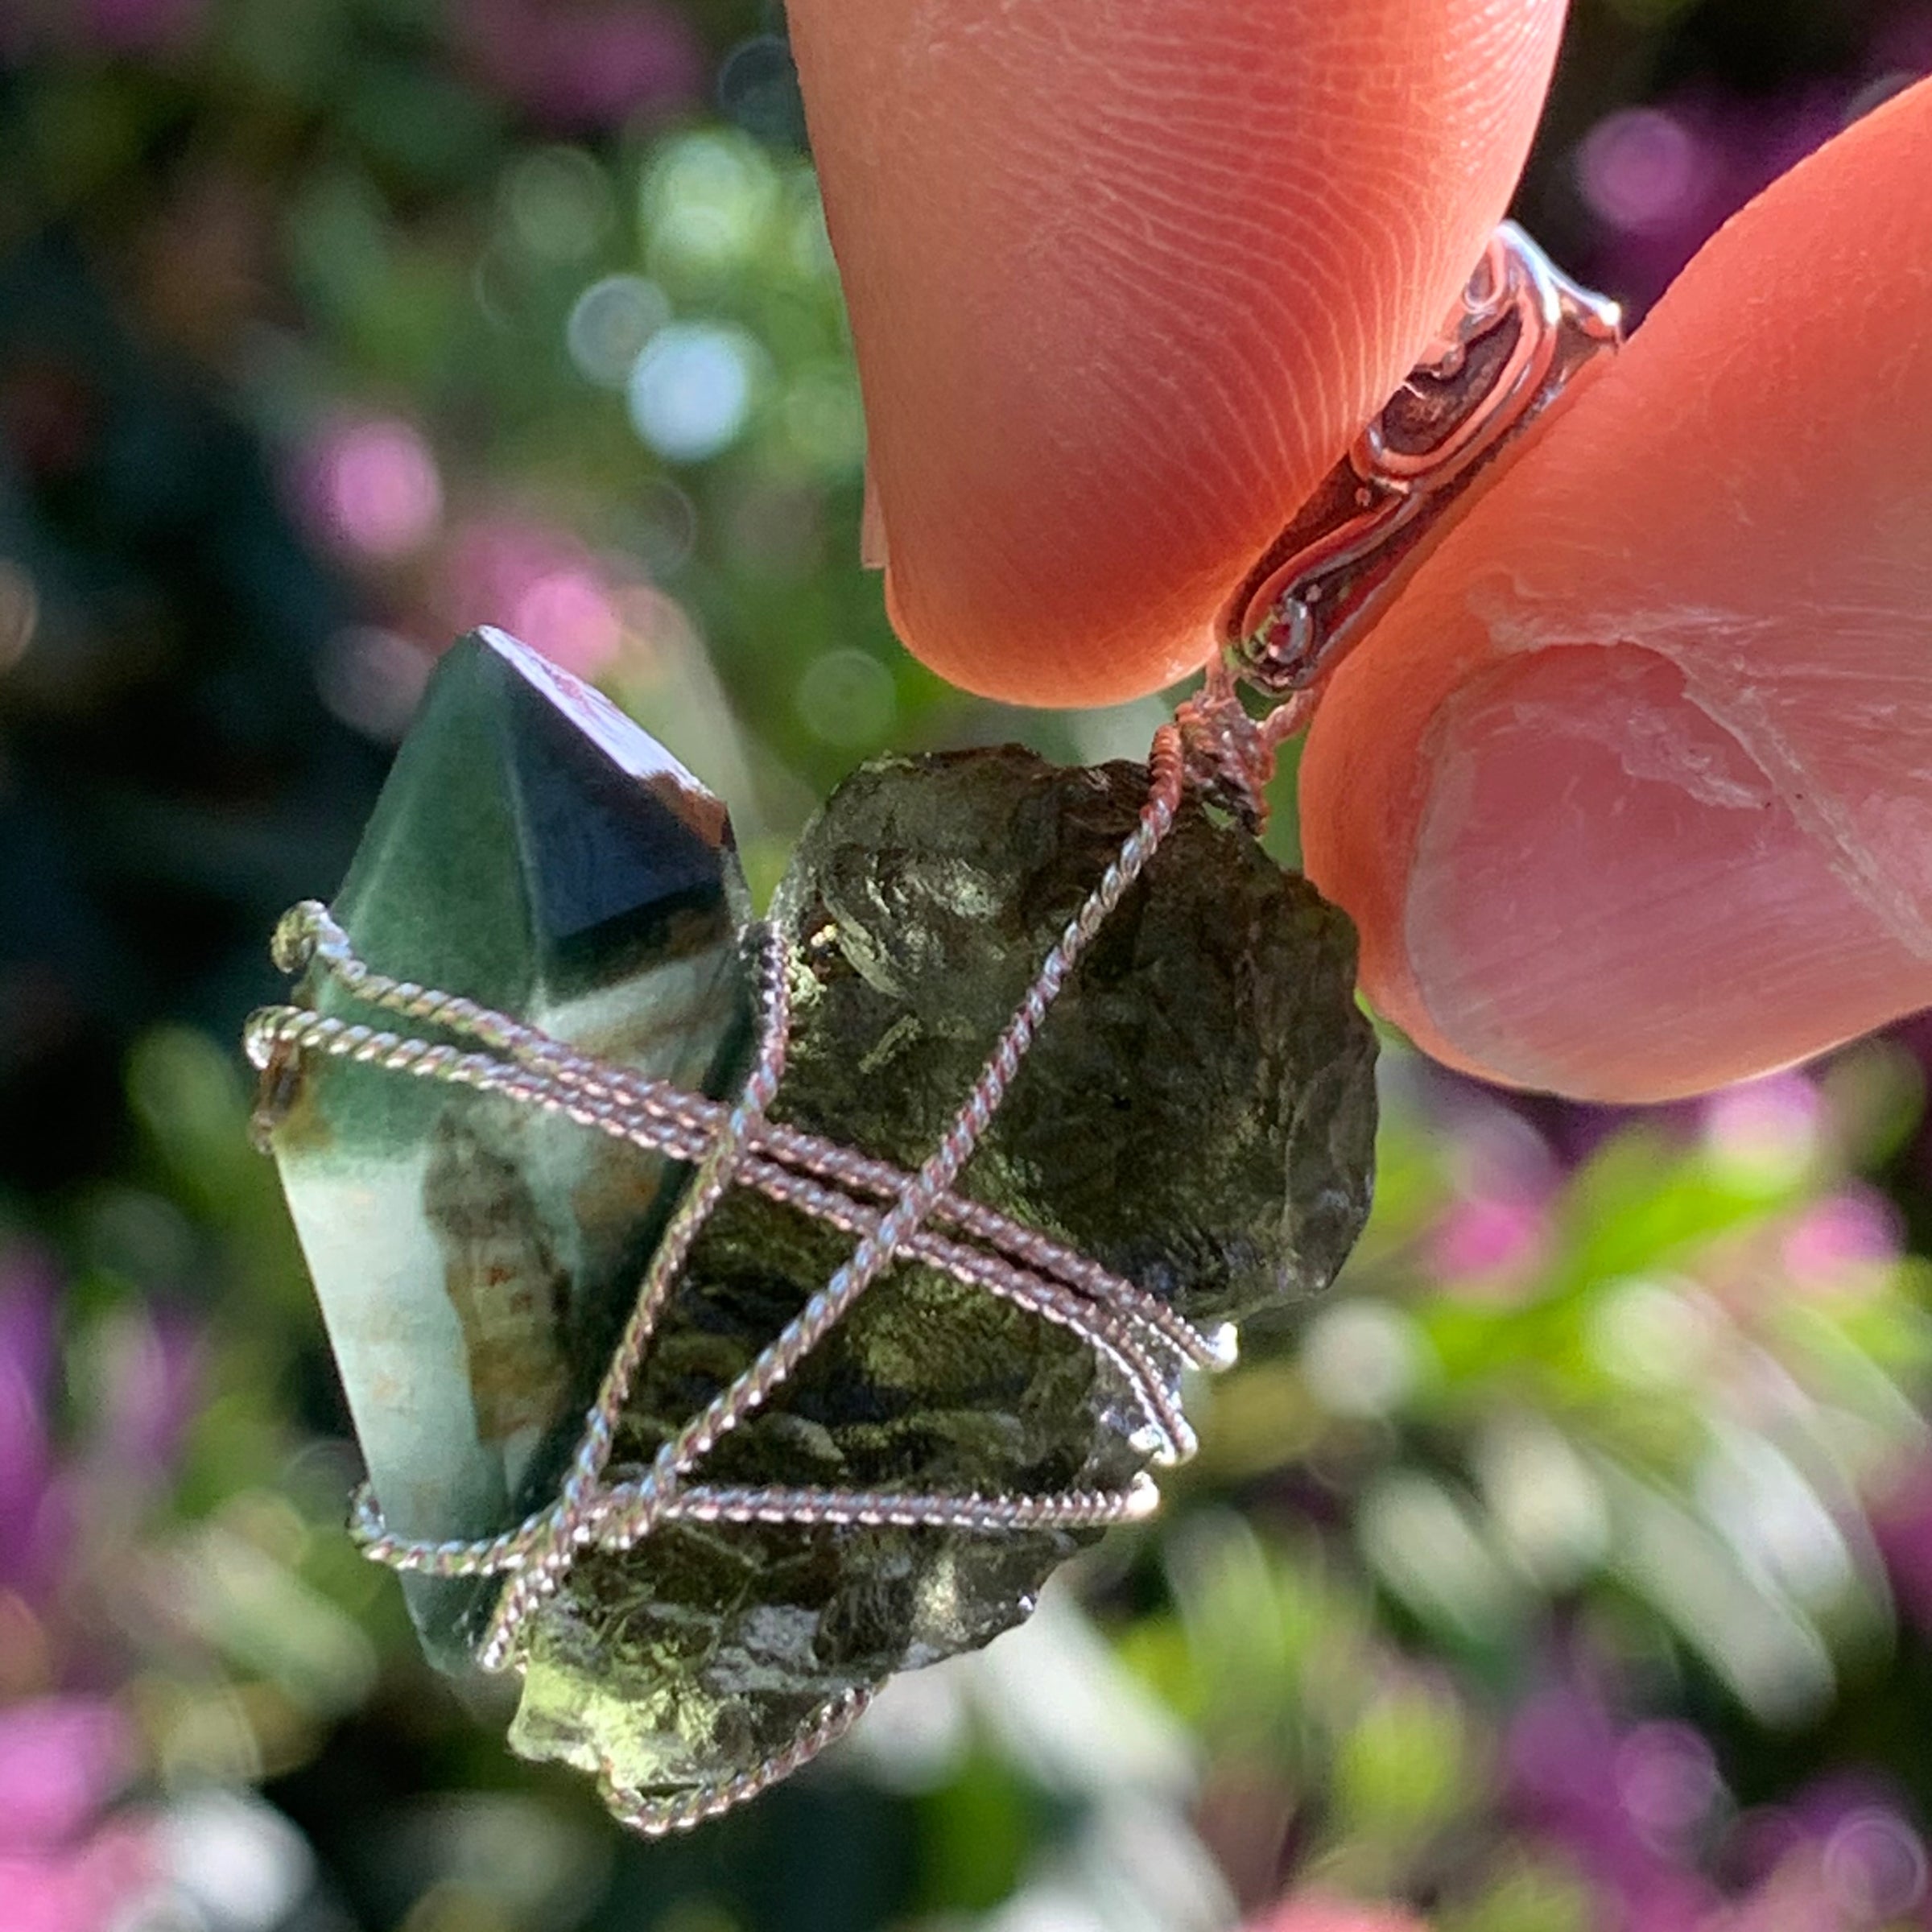 raw moldavite tektite and chlorite quartz crystal sterling silver wire wrapped pendant held up on display to show details